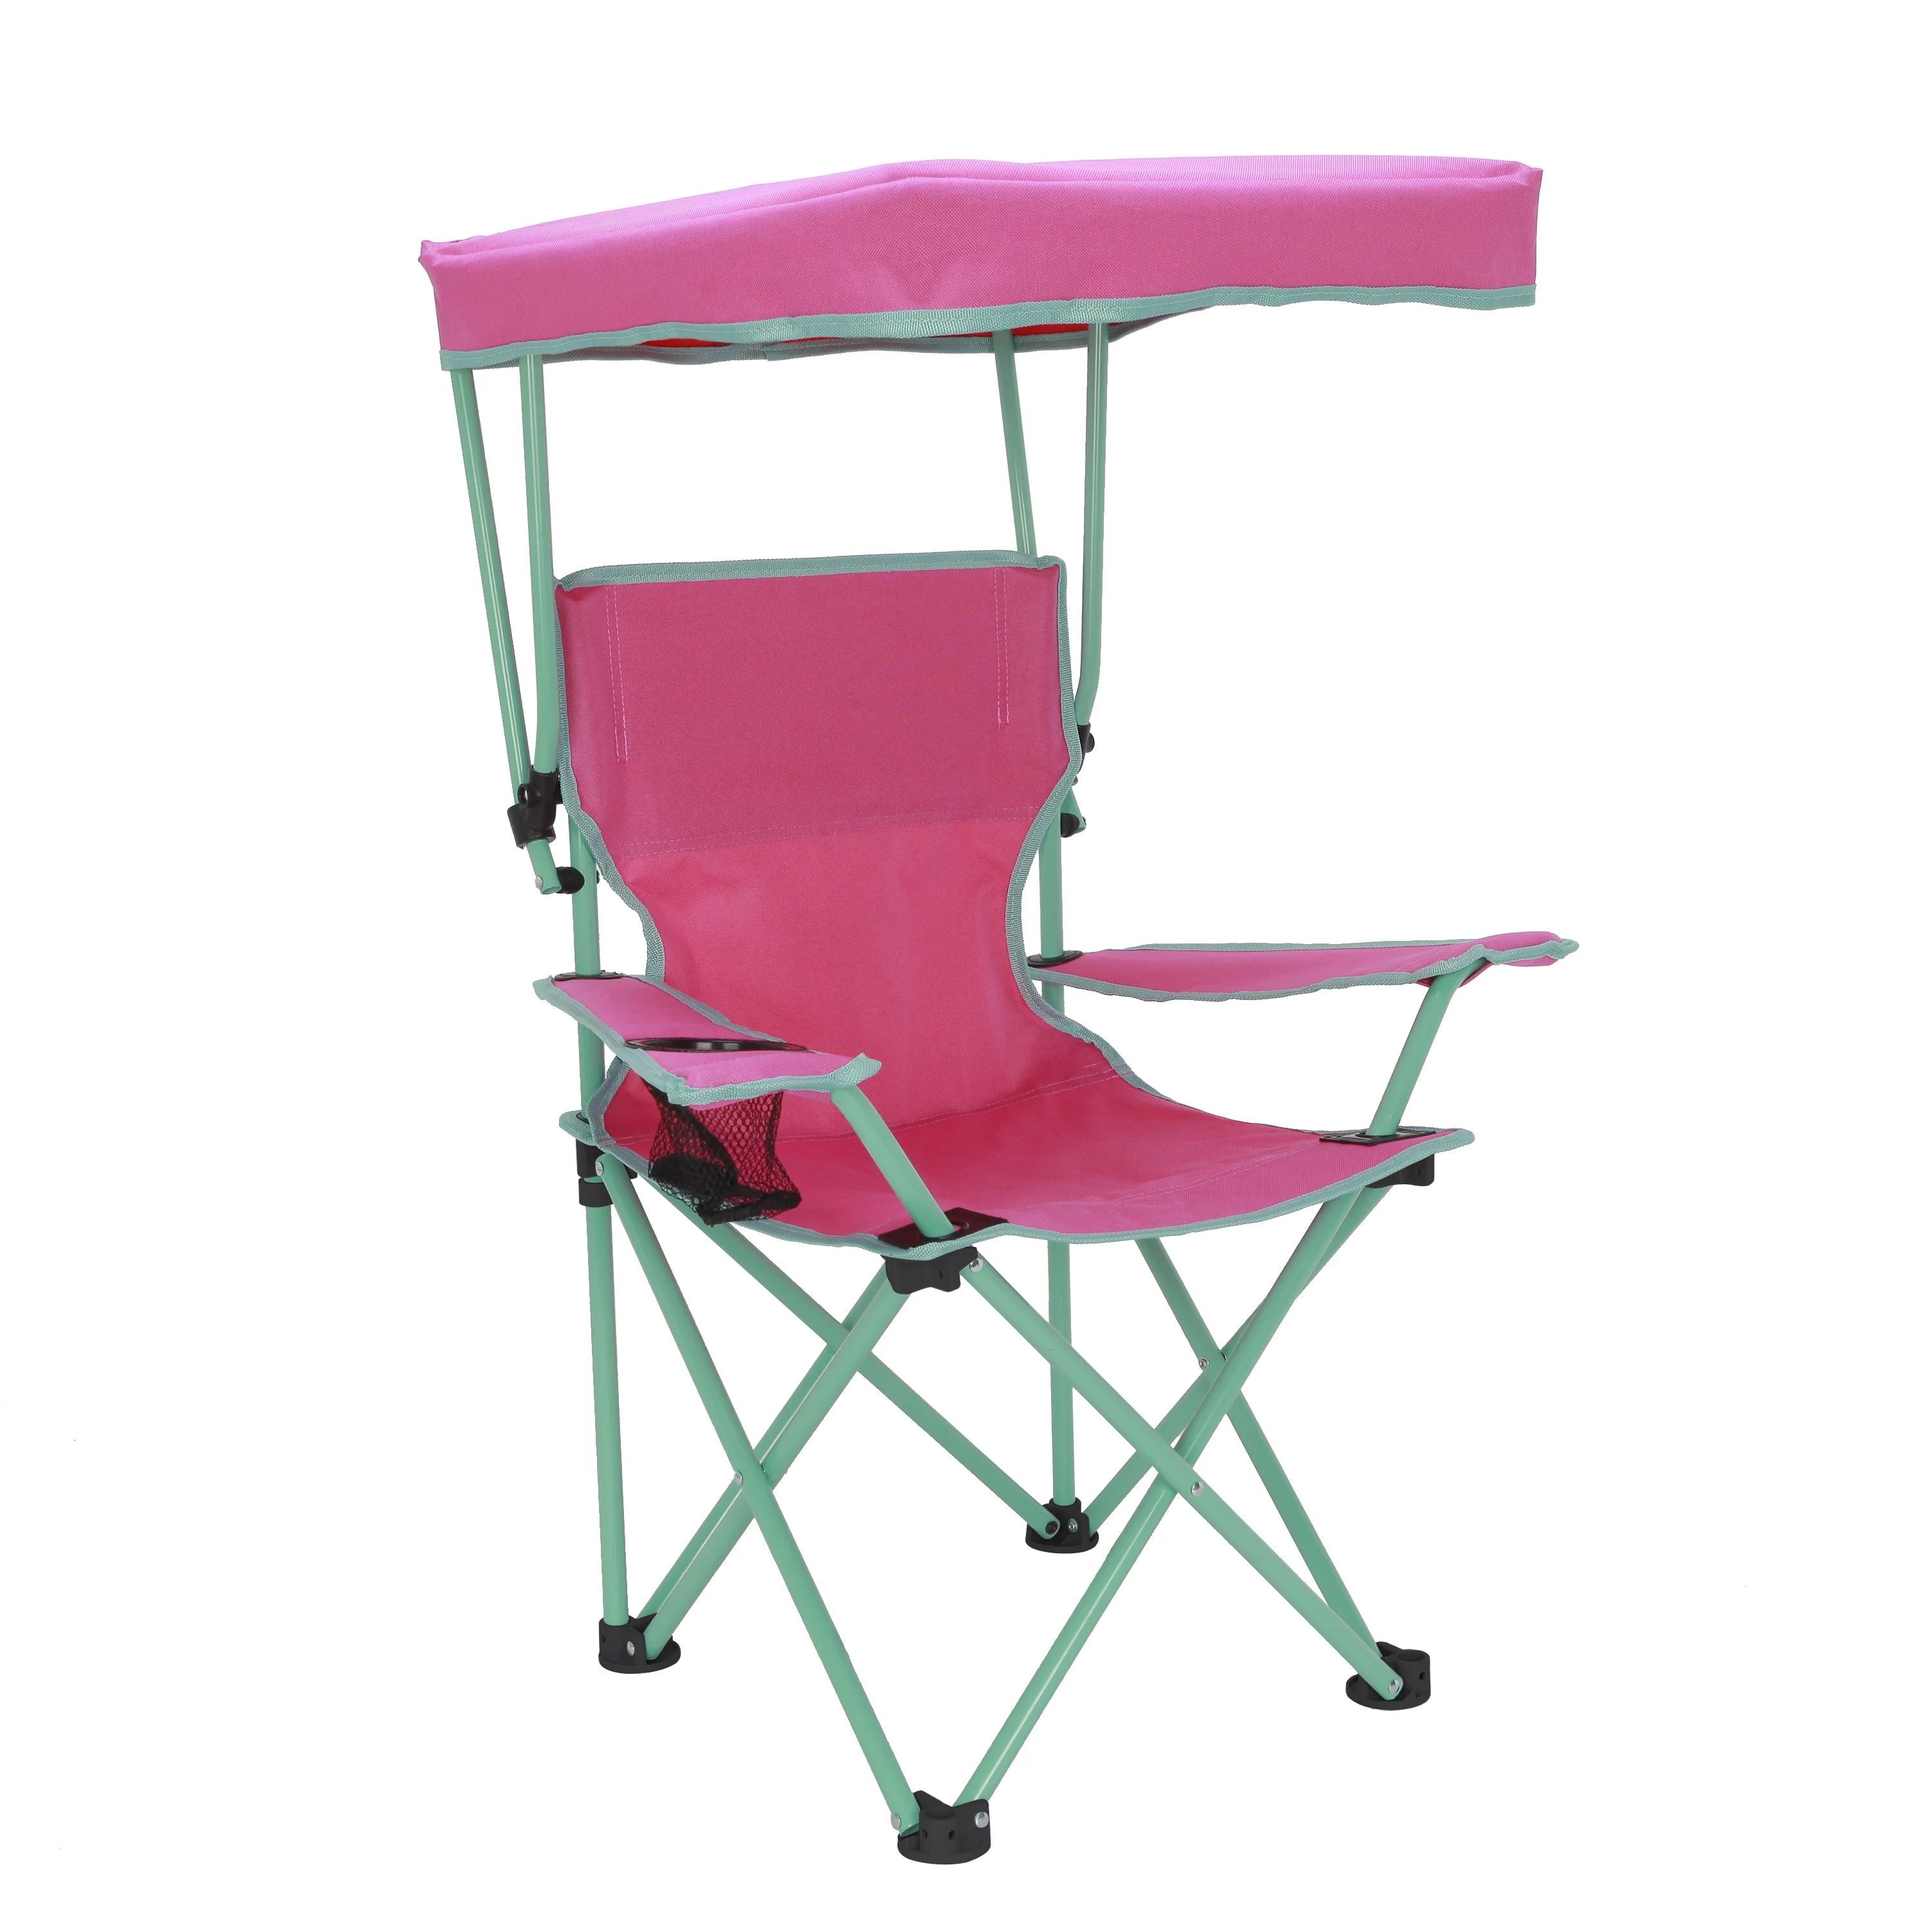 Ozark Trail Kids Canopy Chair with Safety Lock (125 lb. Capacity), Pink/Green | Walmart (US)